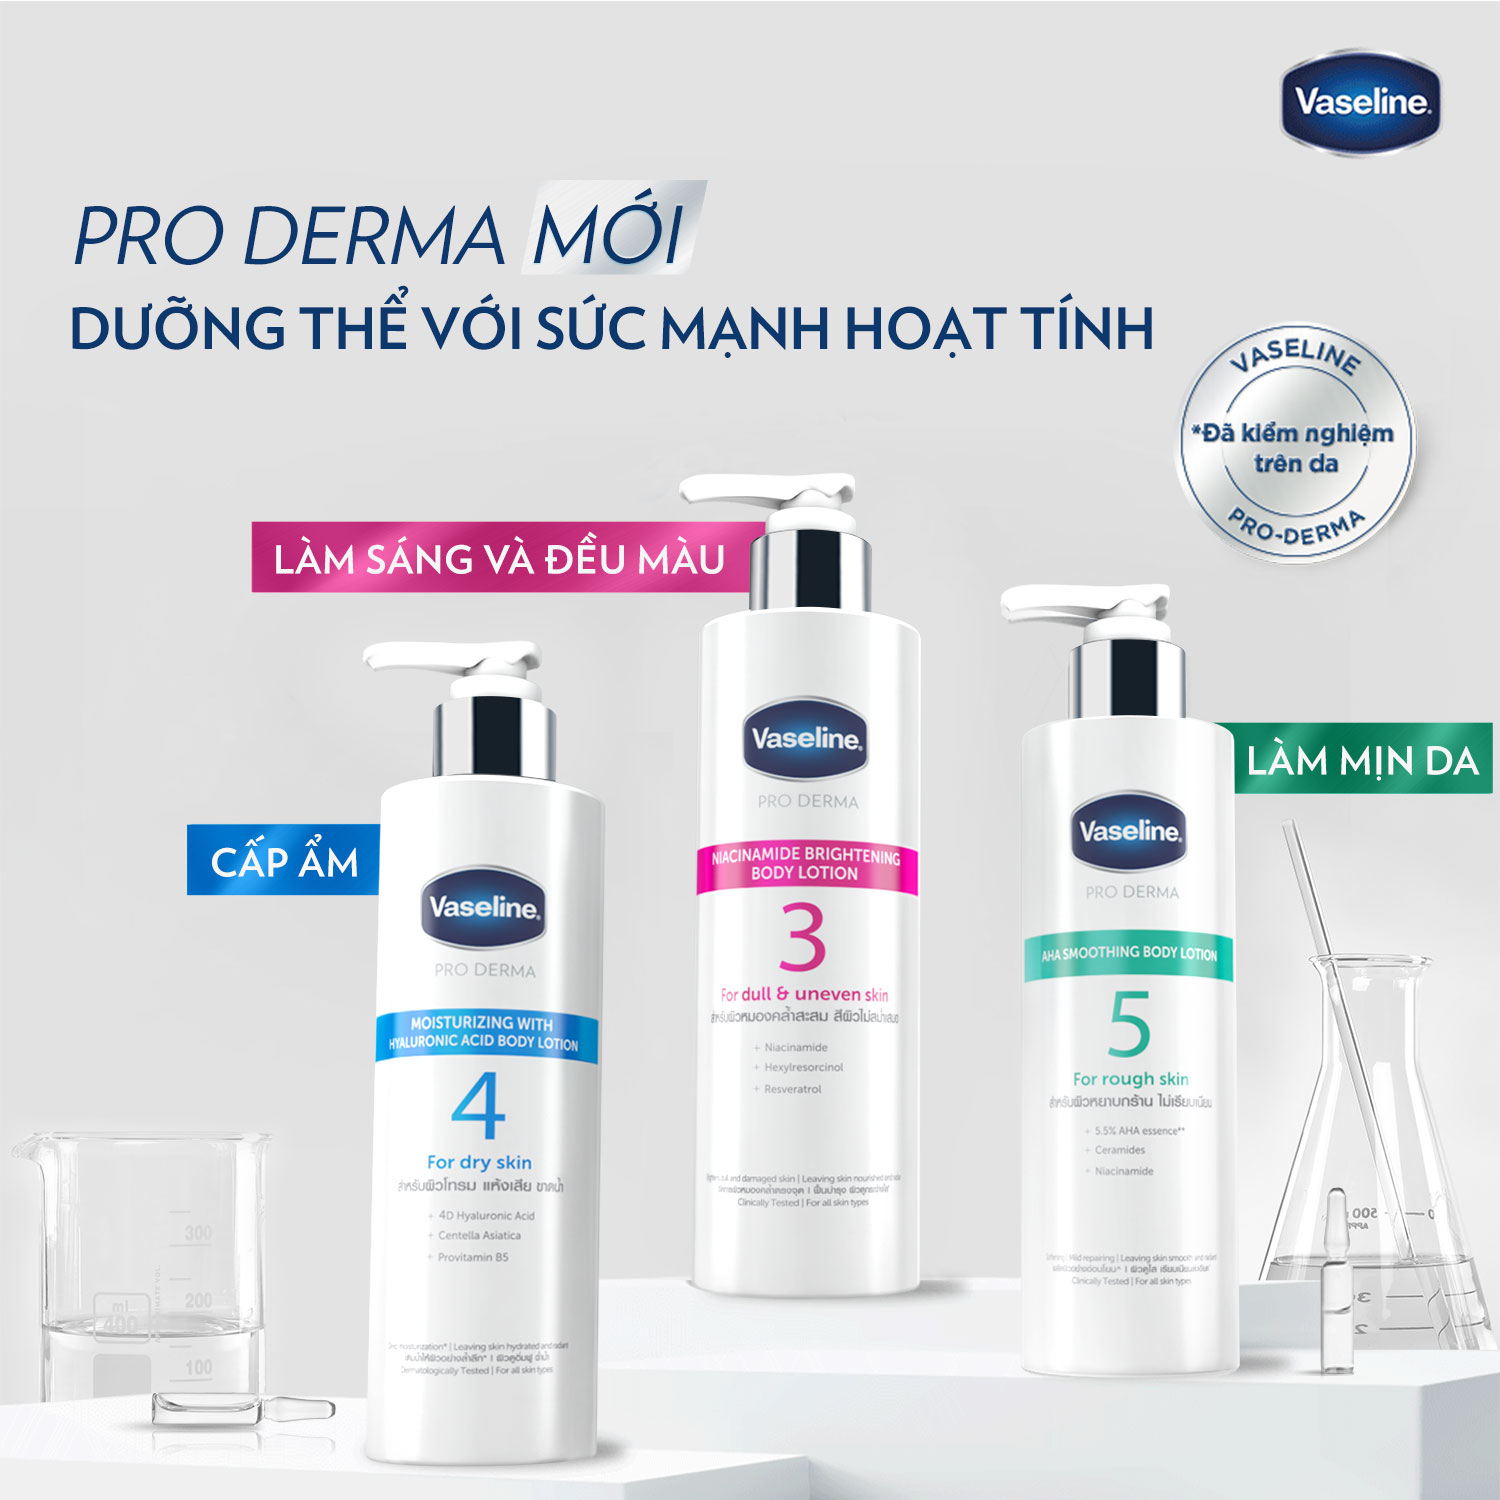 Vaseline Pro Derma Smoothing With AHA Body Lotion